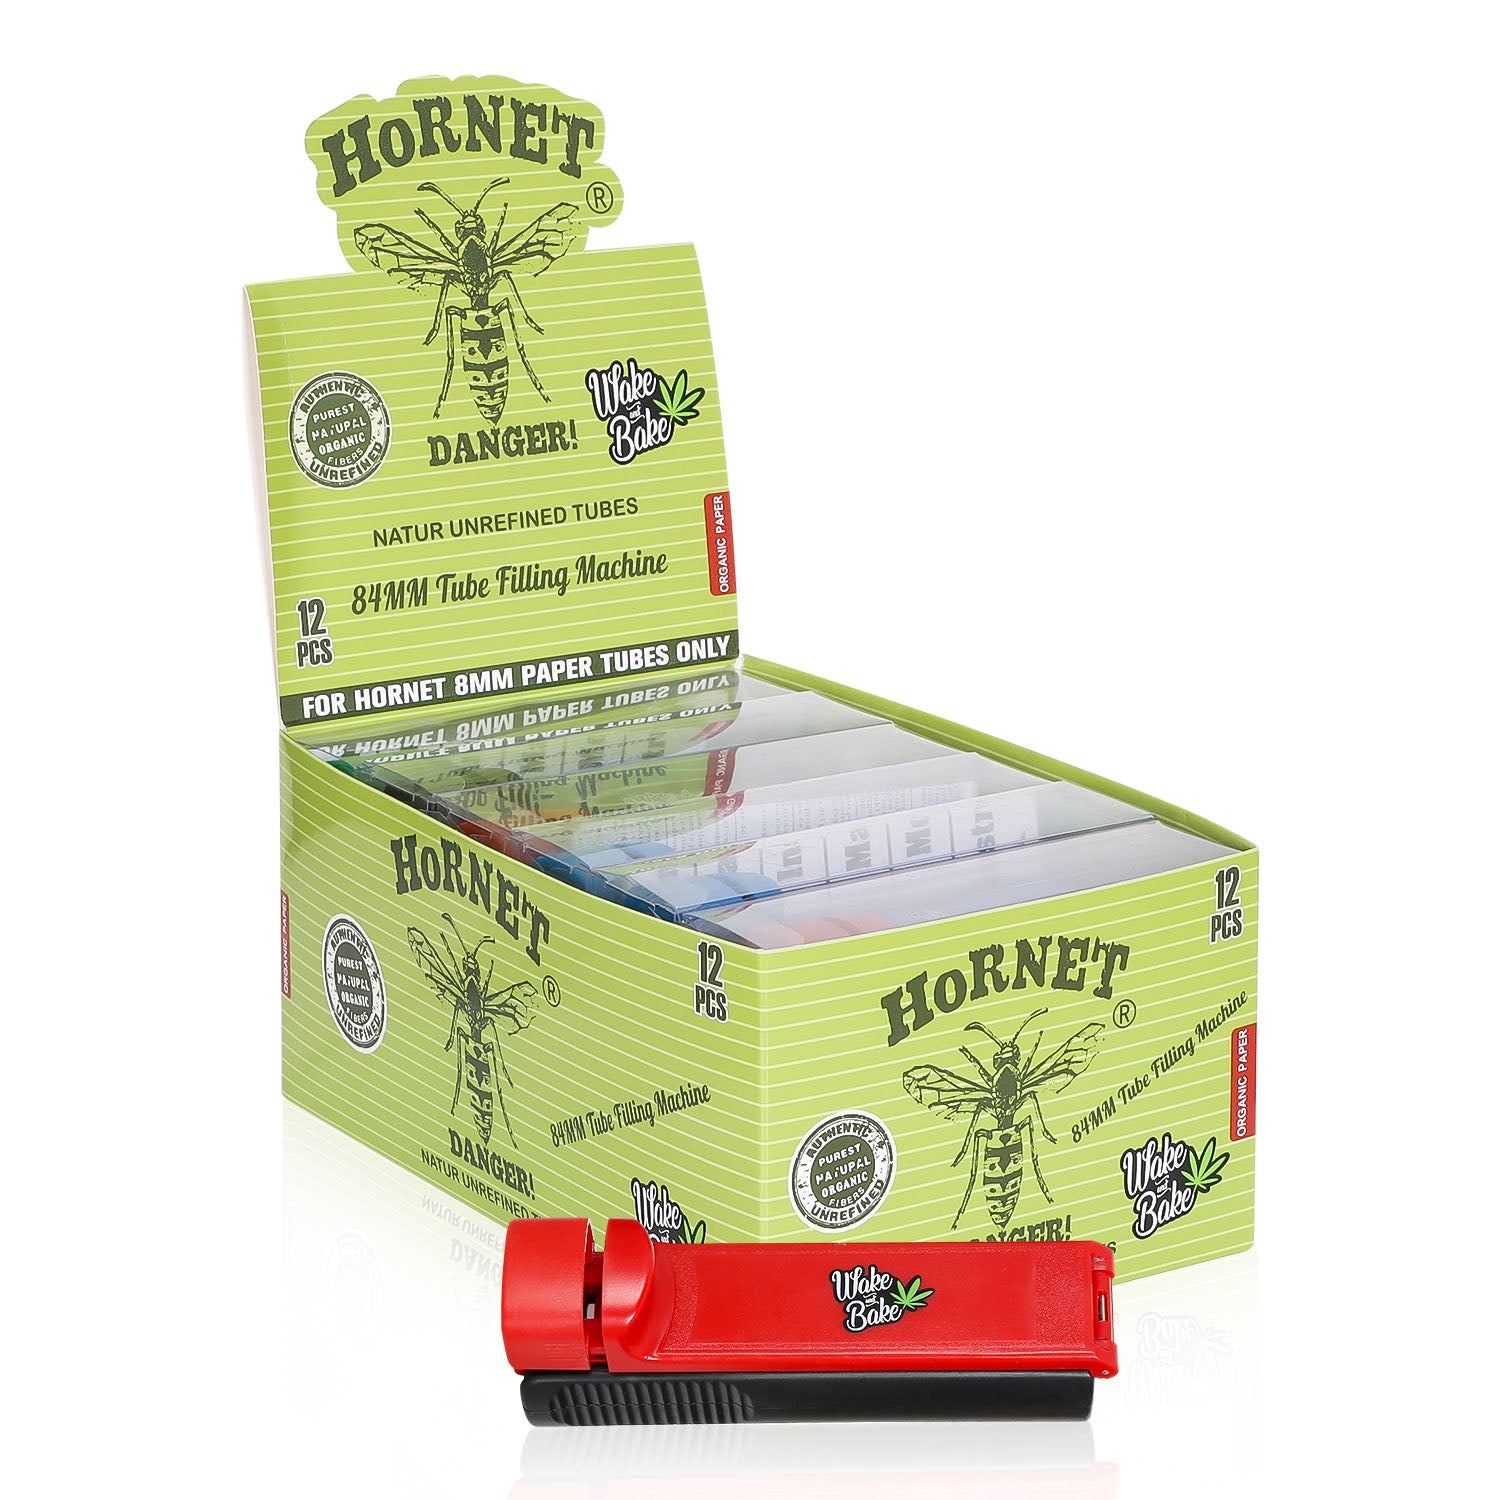 HORNET 84 mm Cigarette Injector Rolling Machine, Quick Tube Filing & Hand Operated Tool Rolling Machine, 12 PCS / Box